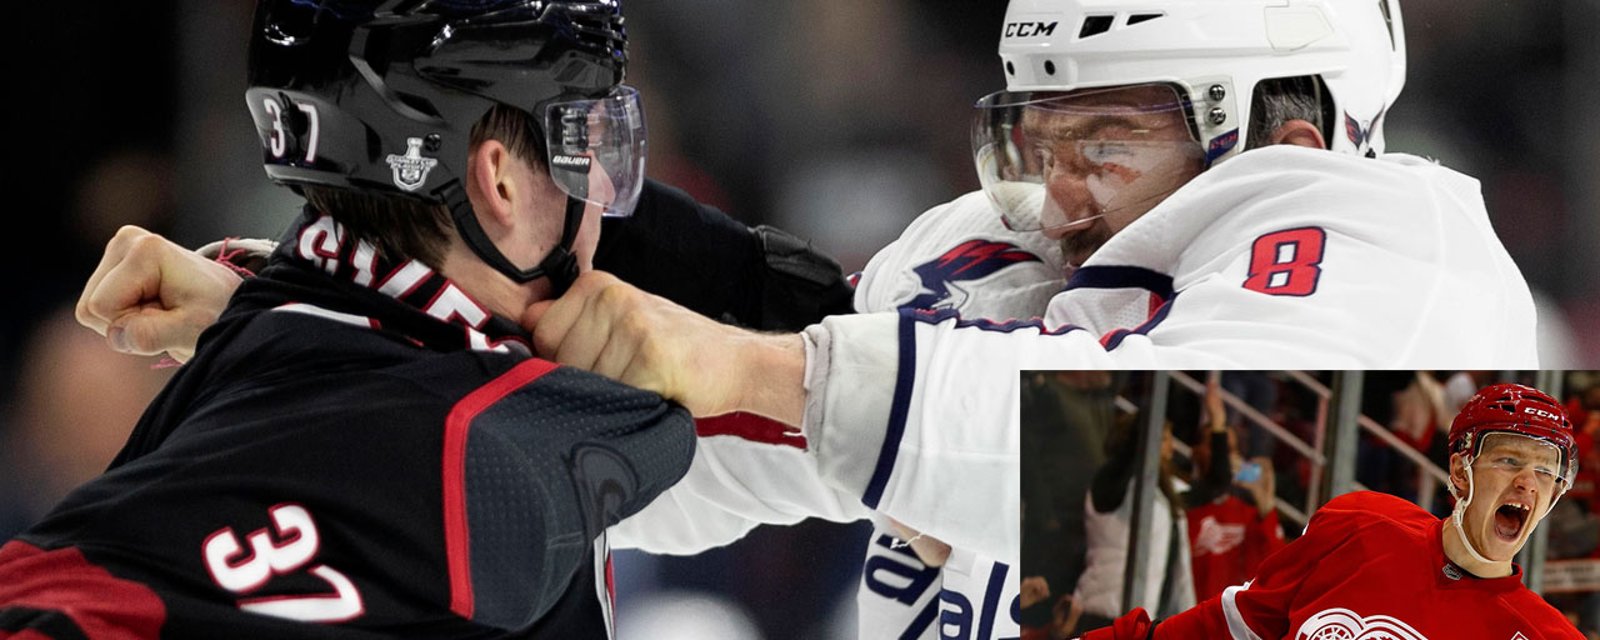 Breaking: NHL threatens to punish Svechnikov’s brother who vowed revenge on Ovechkin